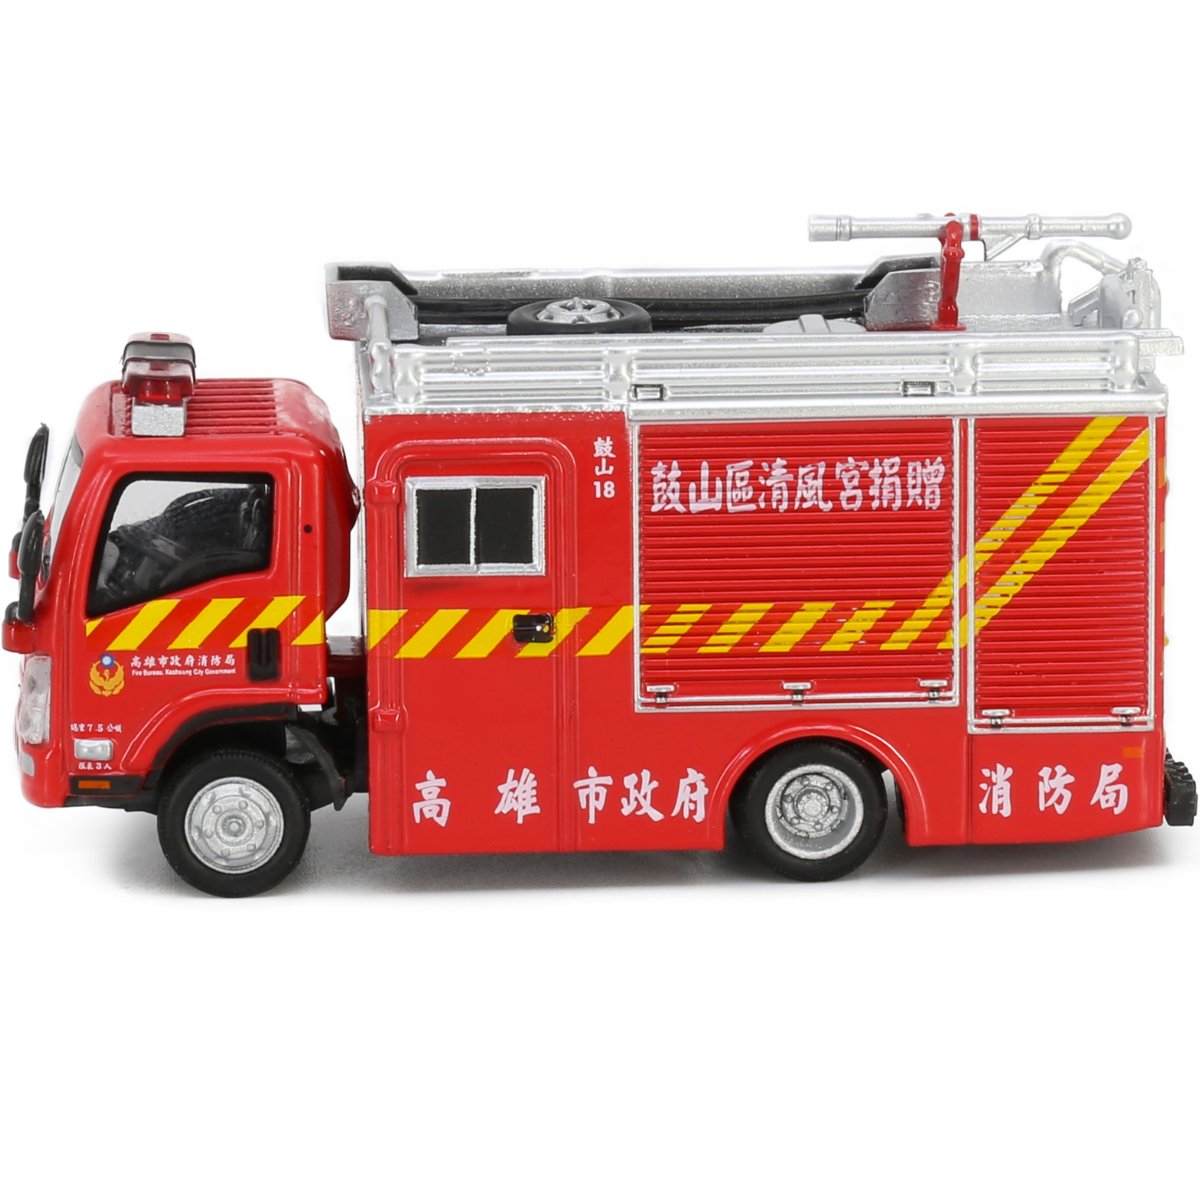 Tiny Models Isuzu N Series Kaohsiung City Fire Department (1:76 Scale) - Phillips Hobbies